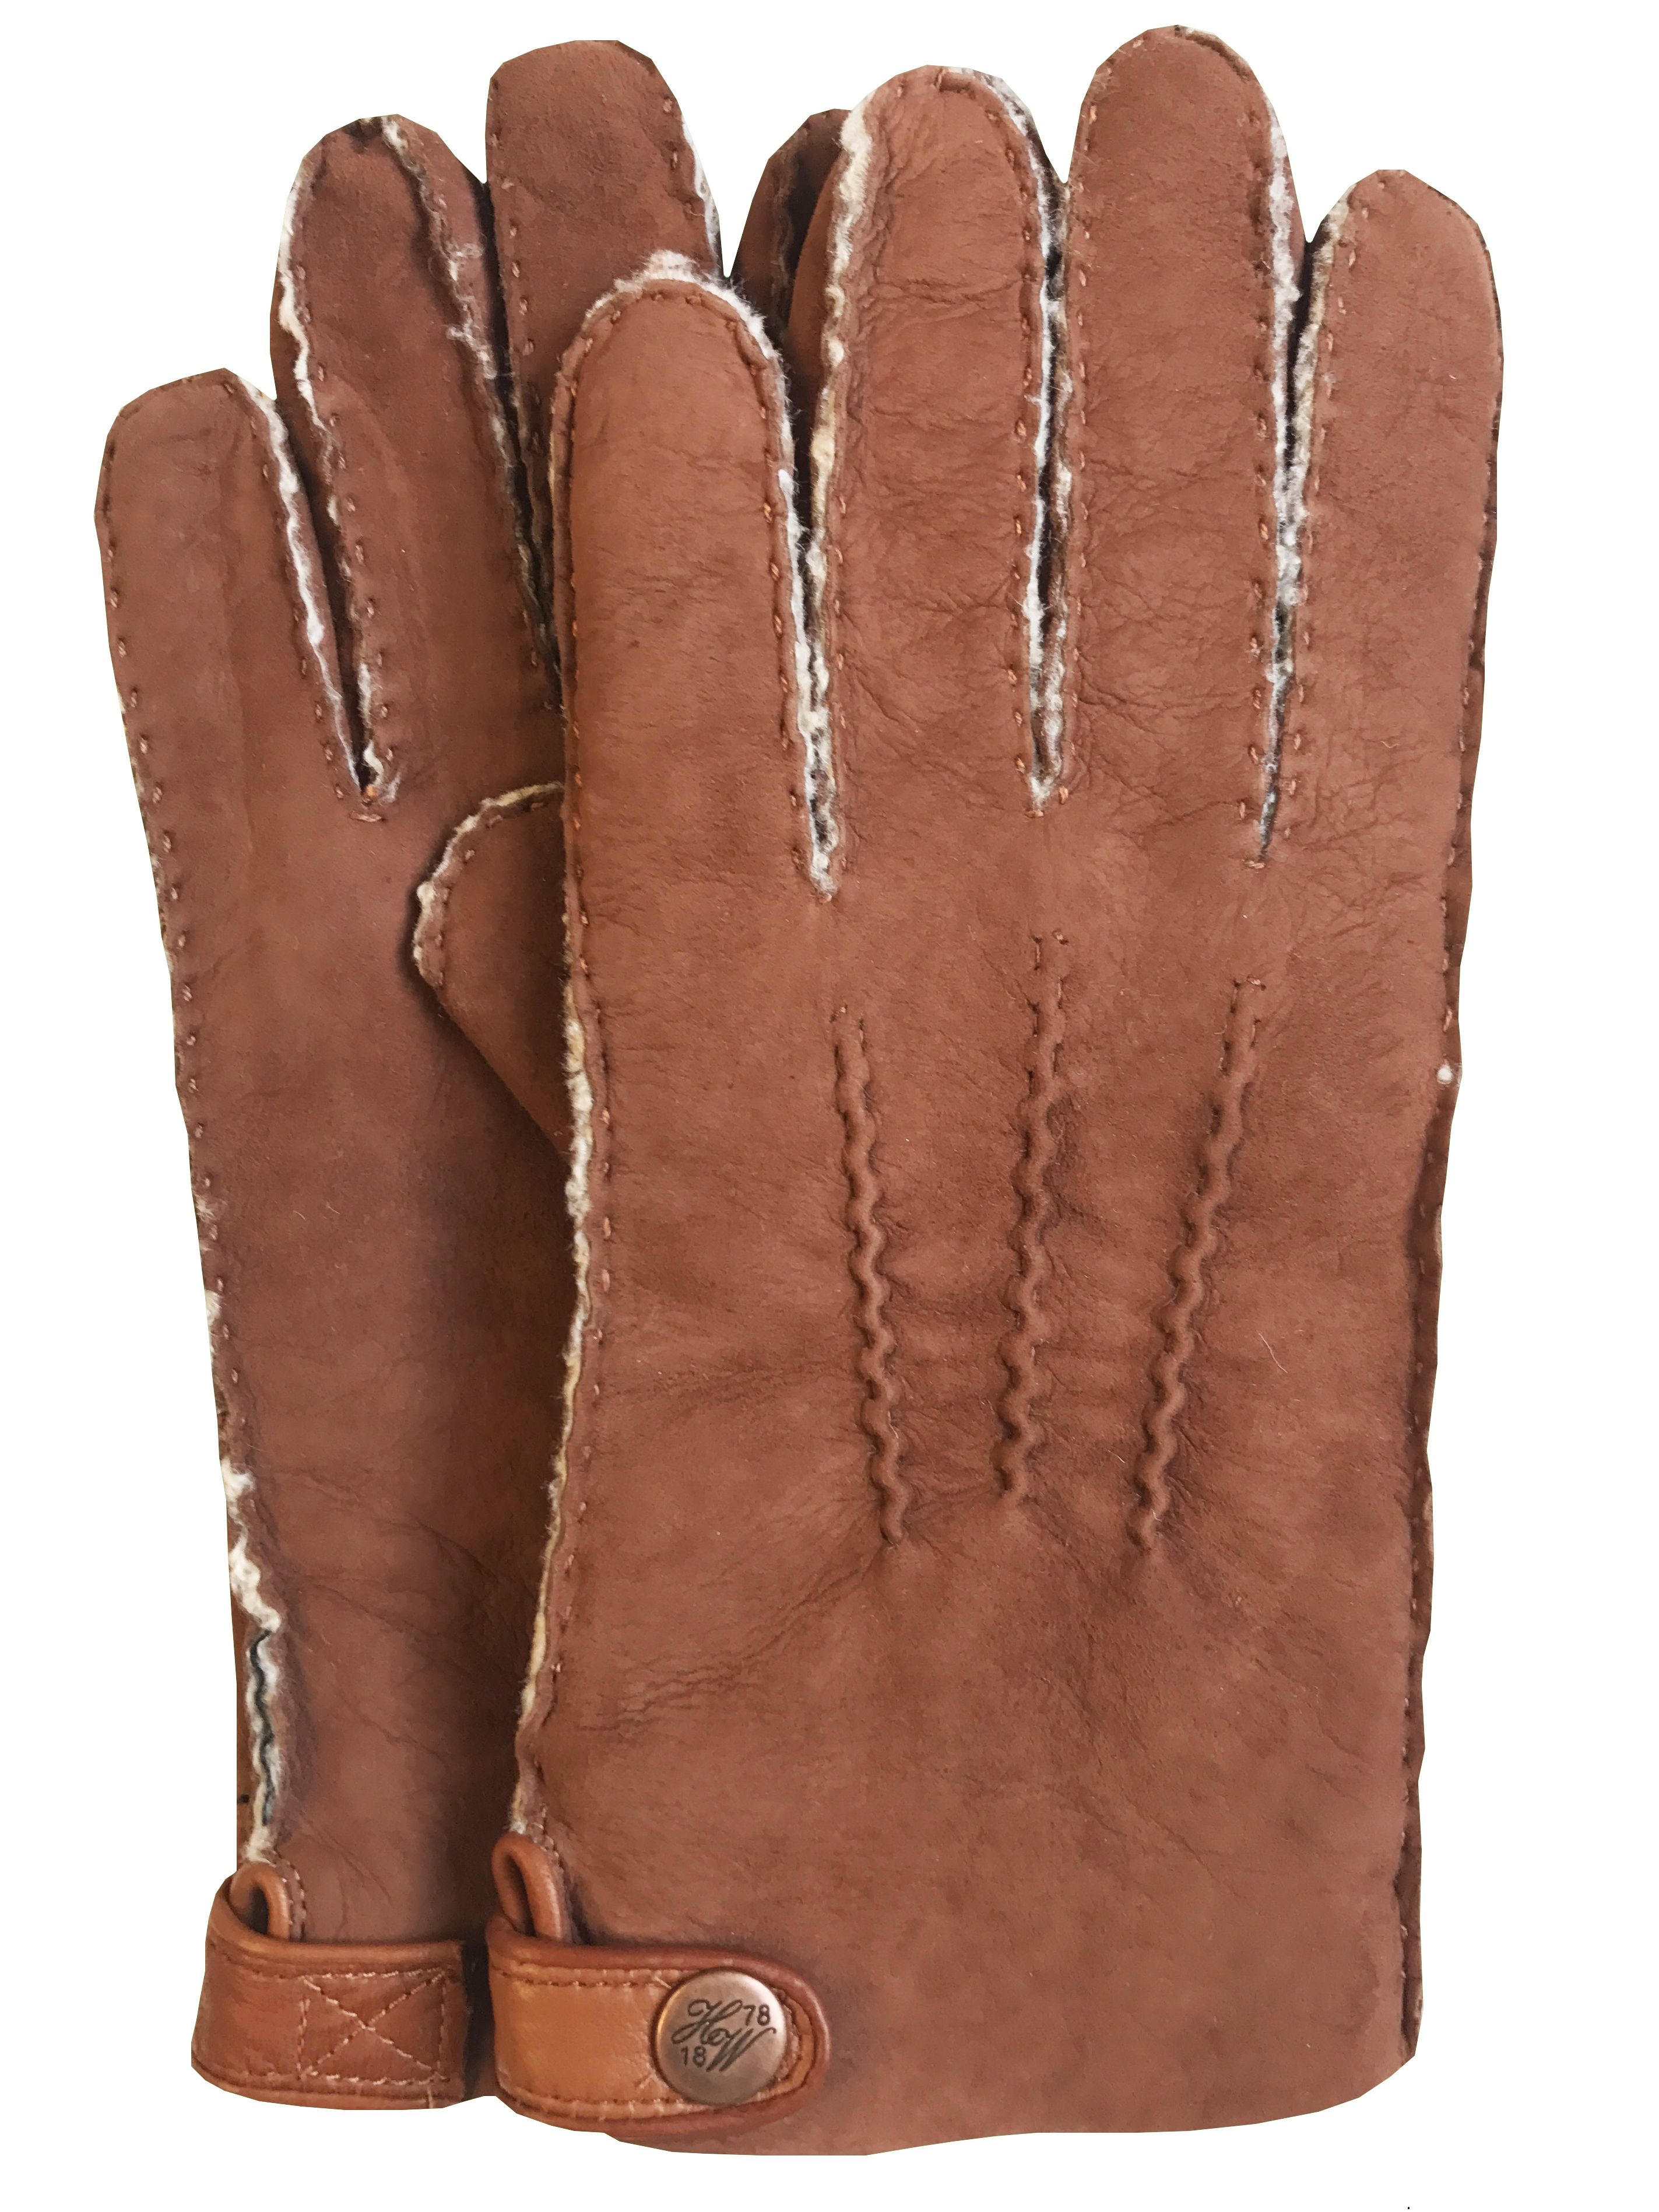 Handsewn Double-Faced Shearling Gloves